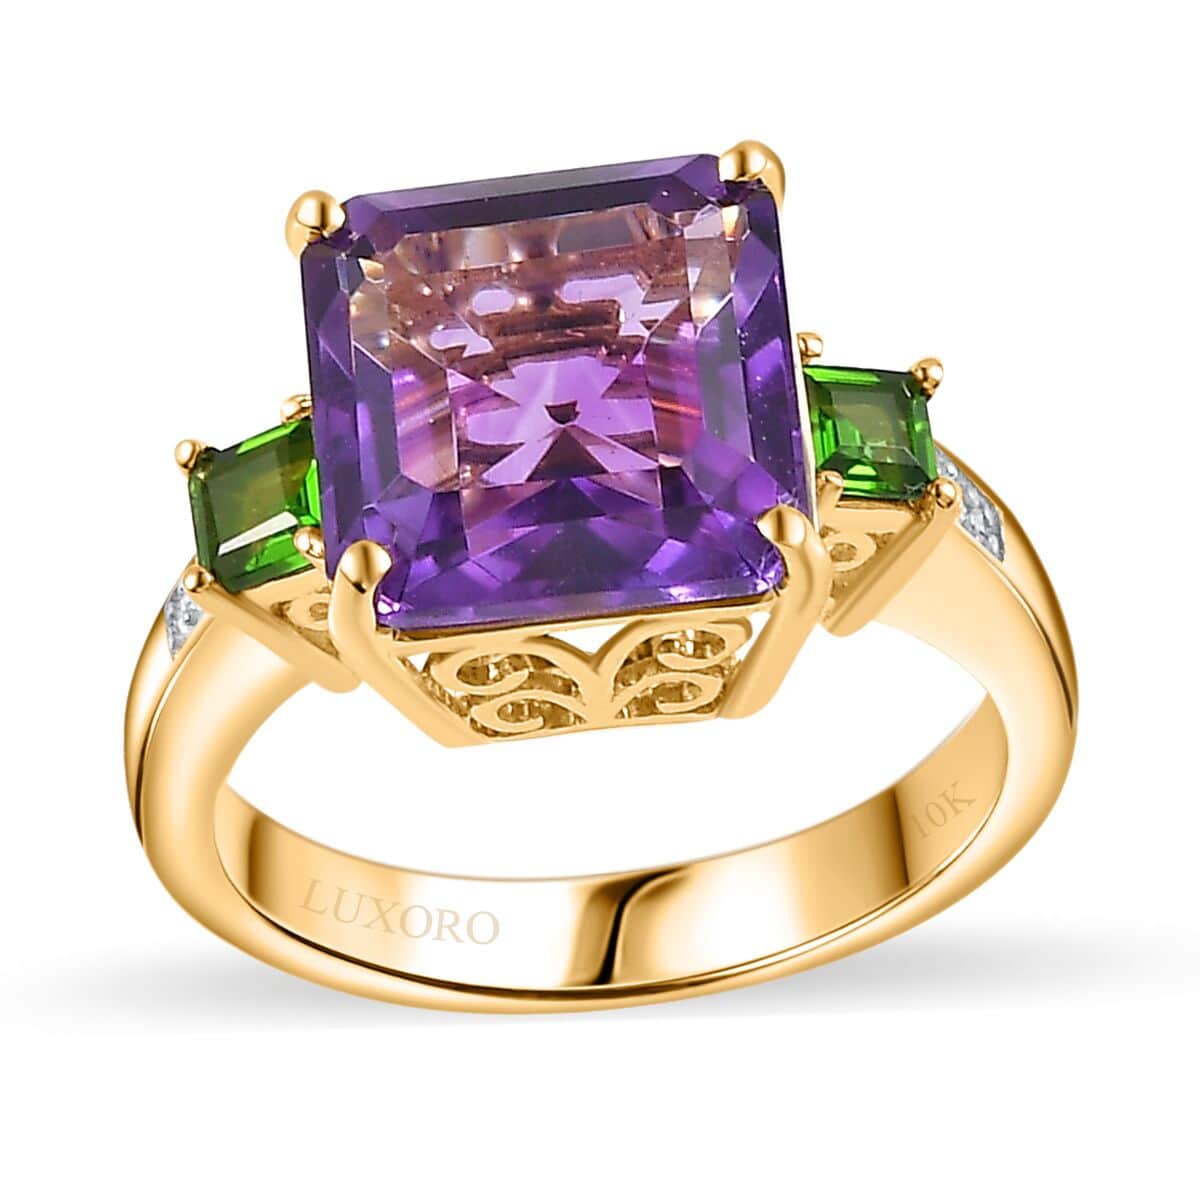 Luxoro 10K Yellow Gold Premium Moroccan Amethyst, Chrome Diopside and G-H I2 Diamond Accent Ring (Size 8.0) 4.15 Grams 4.90 ctw image number 0